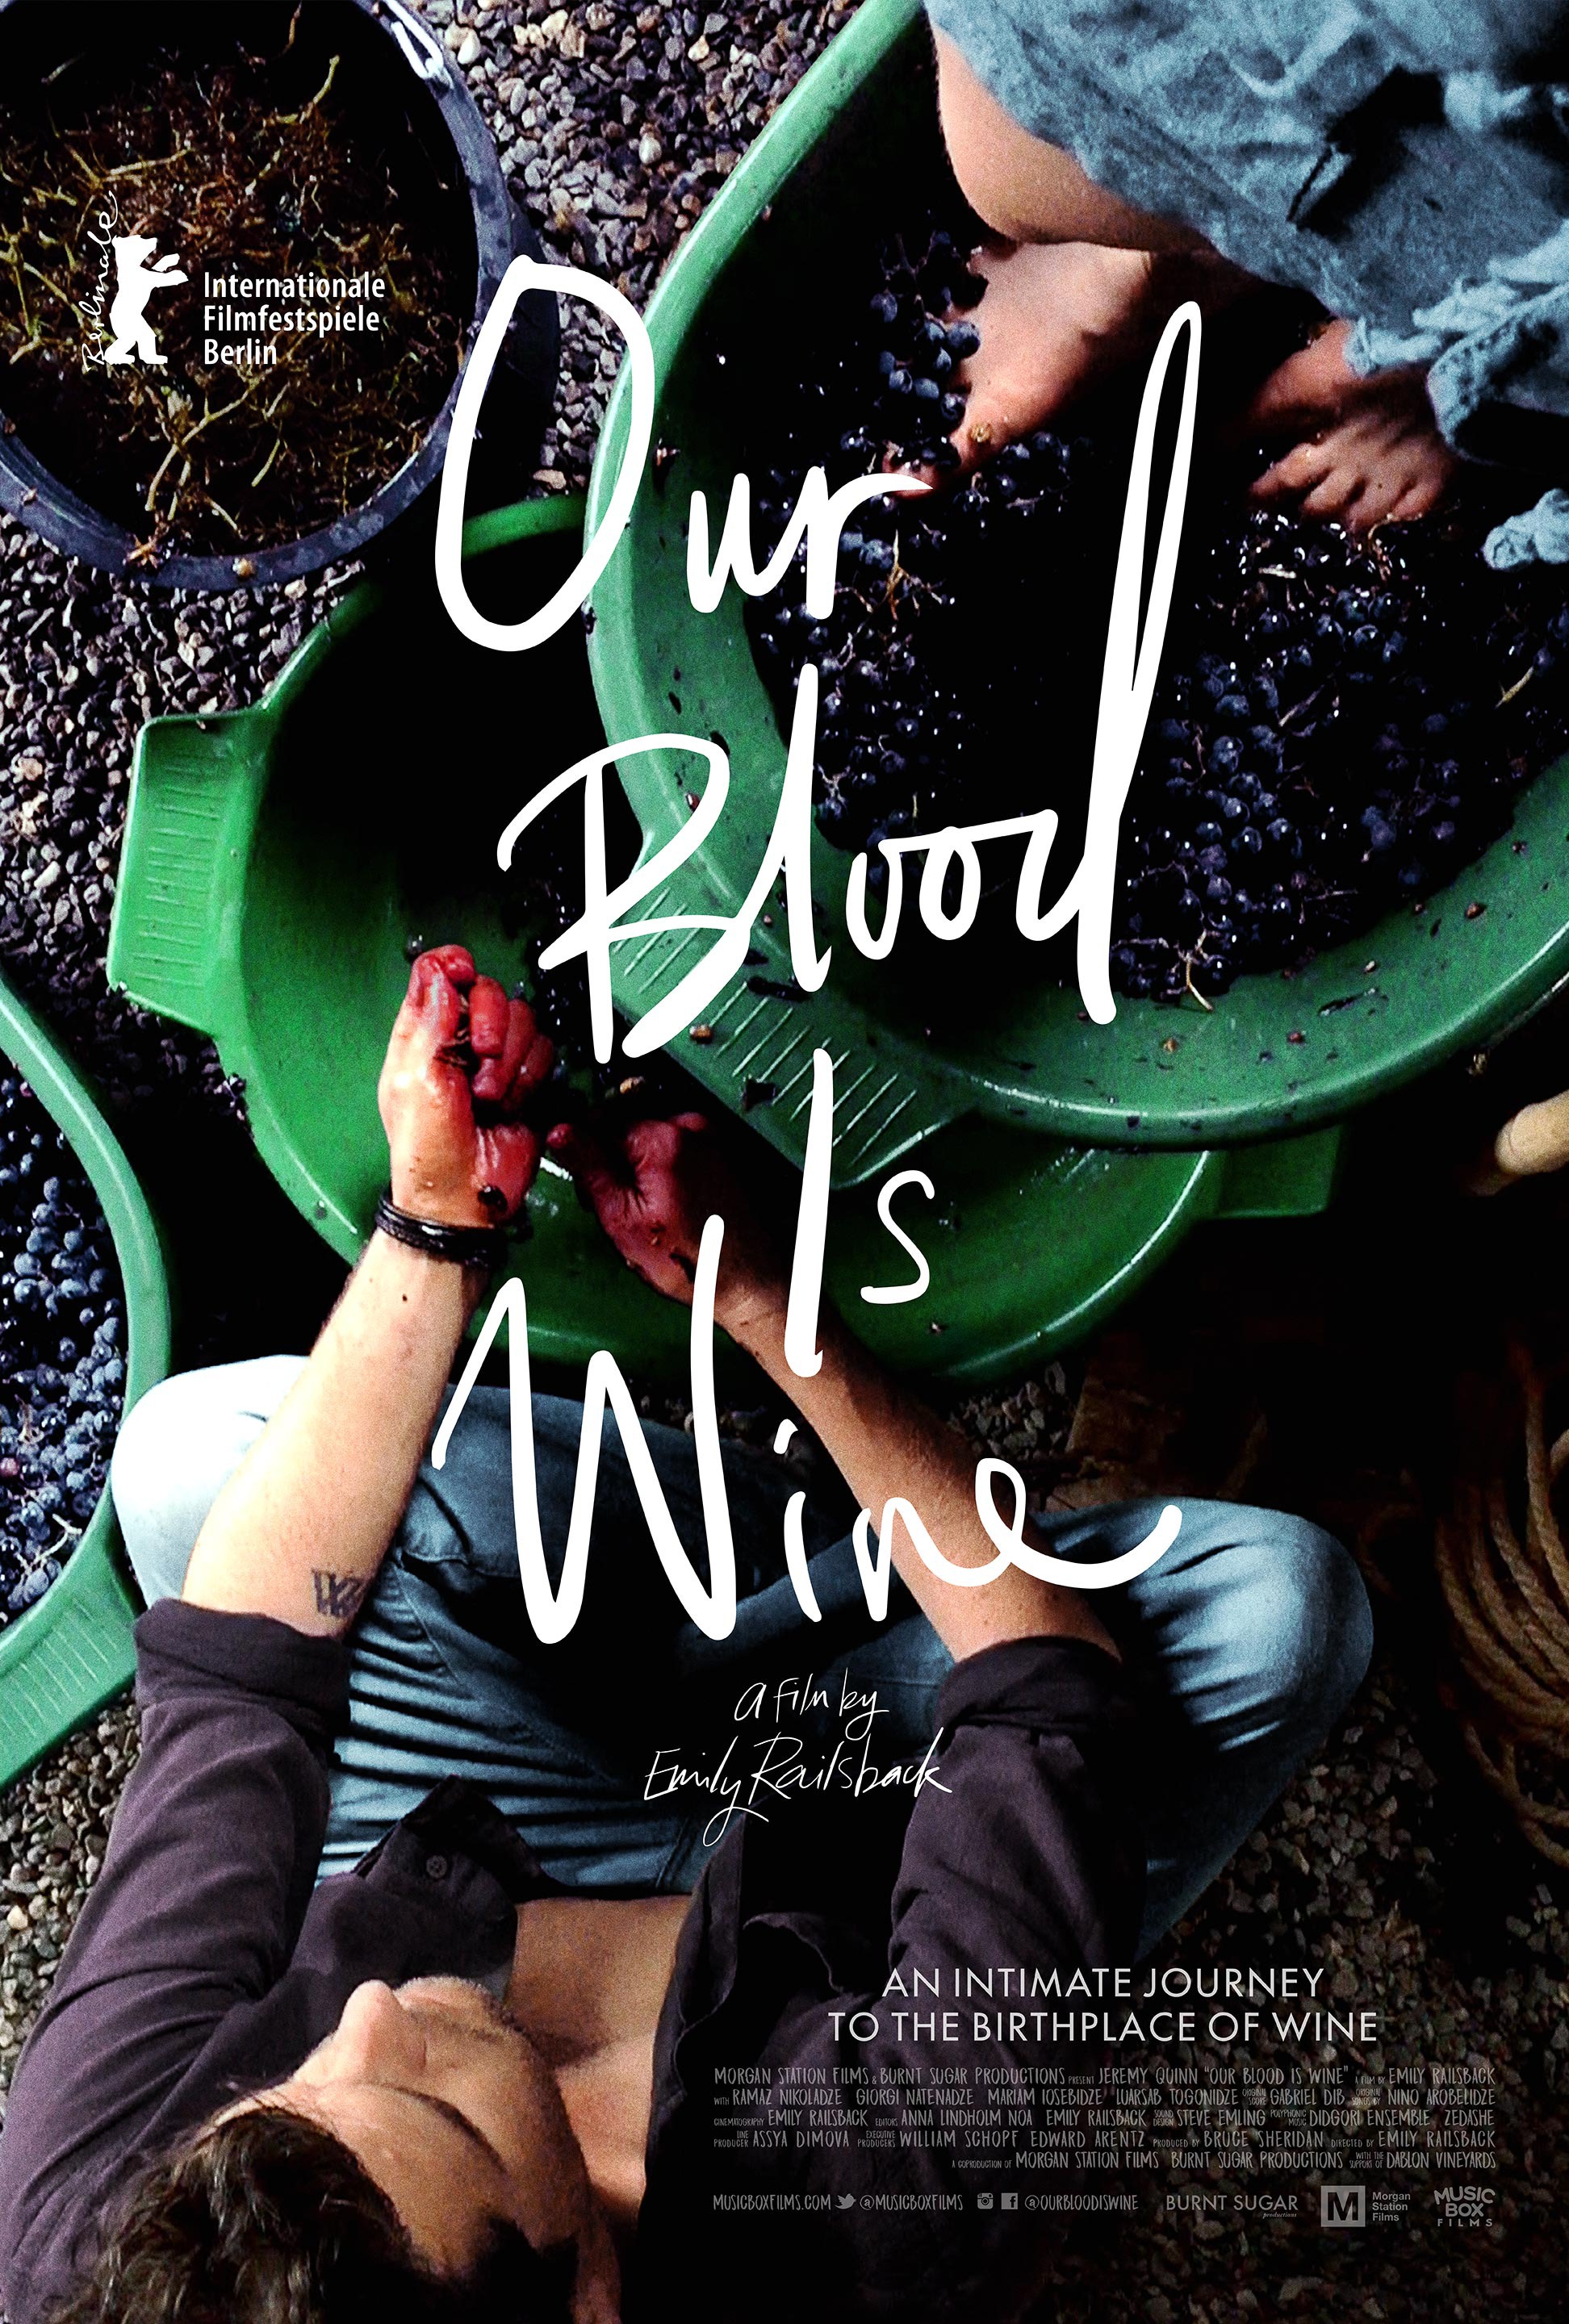 Our Blood is Wine